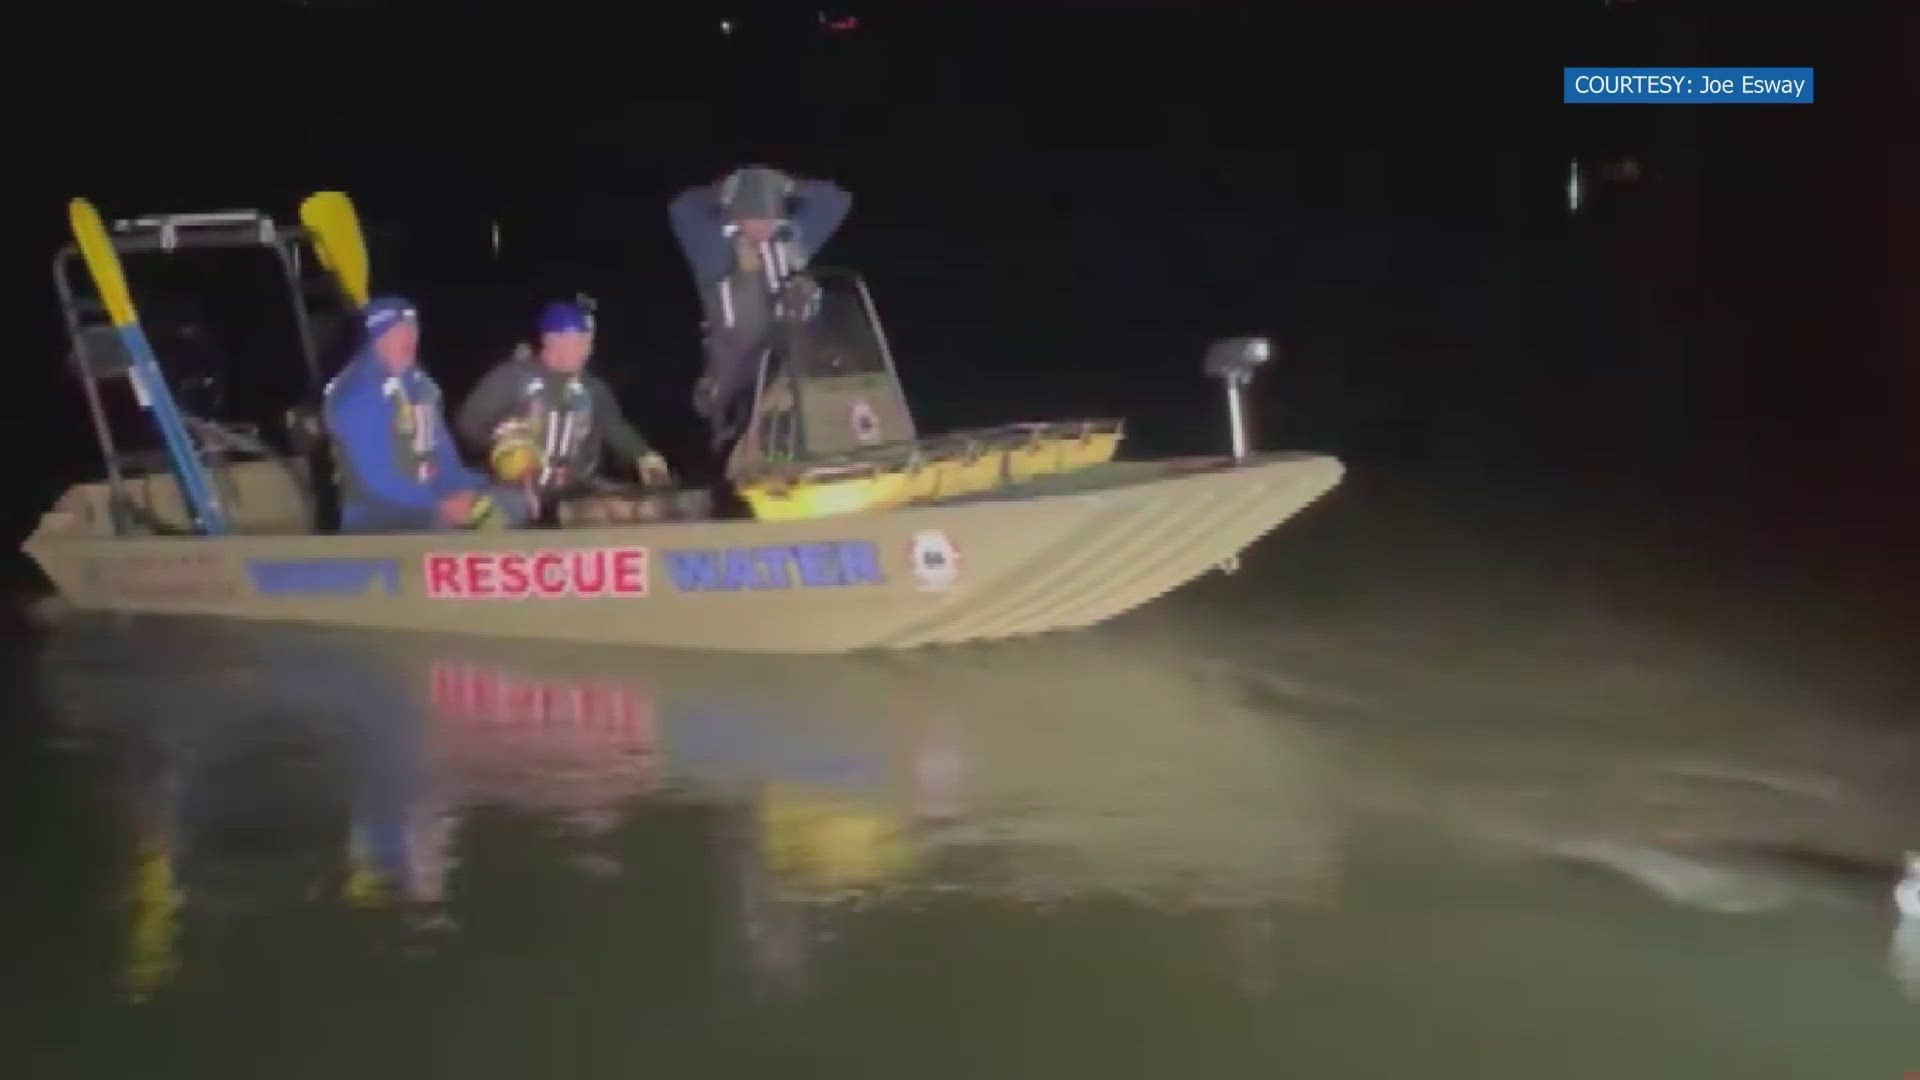 The Cocke County Emergency Management Agency said crews were out on the water for a rescue mission Monday night.